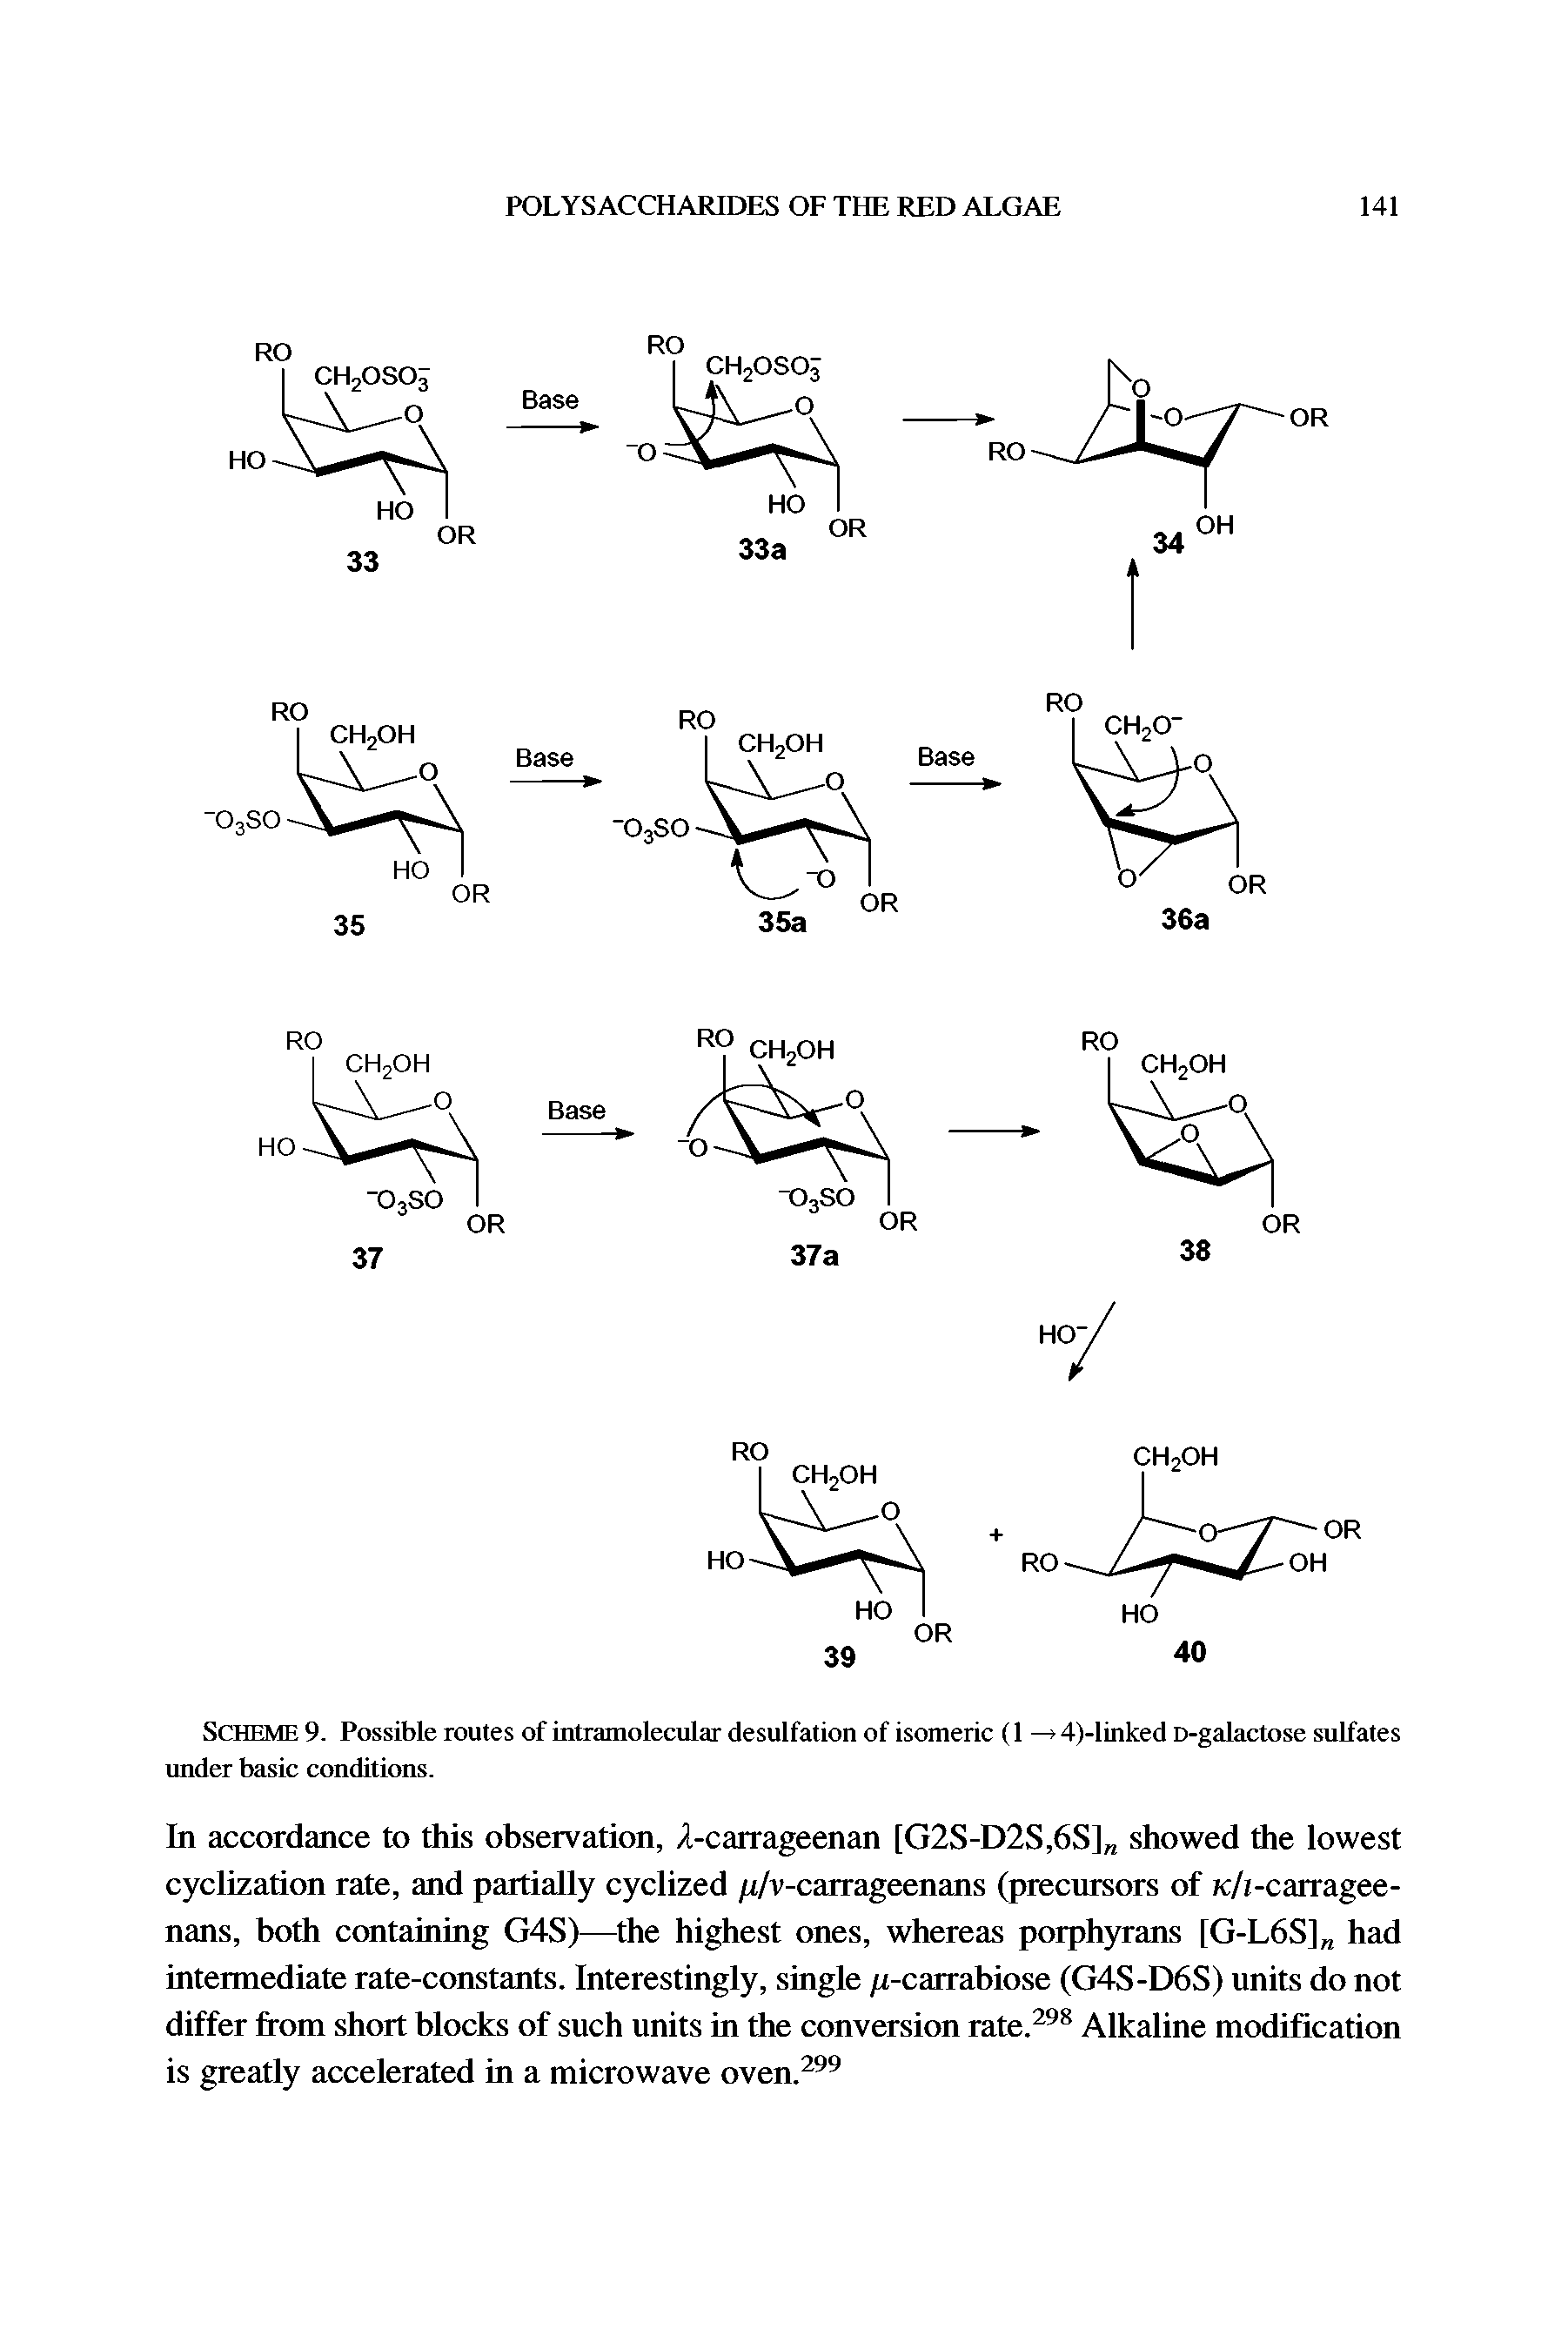 Scheme 9. Possible routes of intramolecular desulfation of isomeric (1 — 4)-linked D-galactose sulfates under basic conditions.